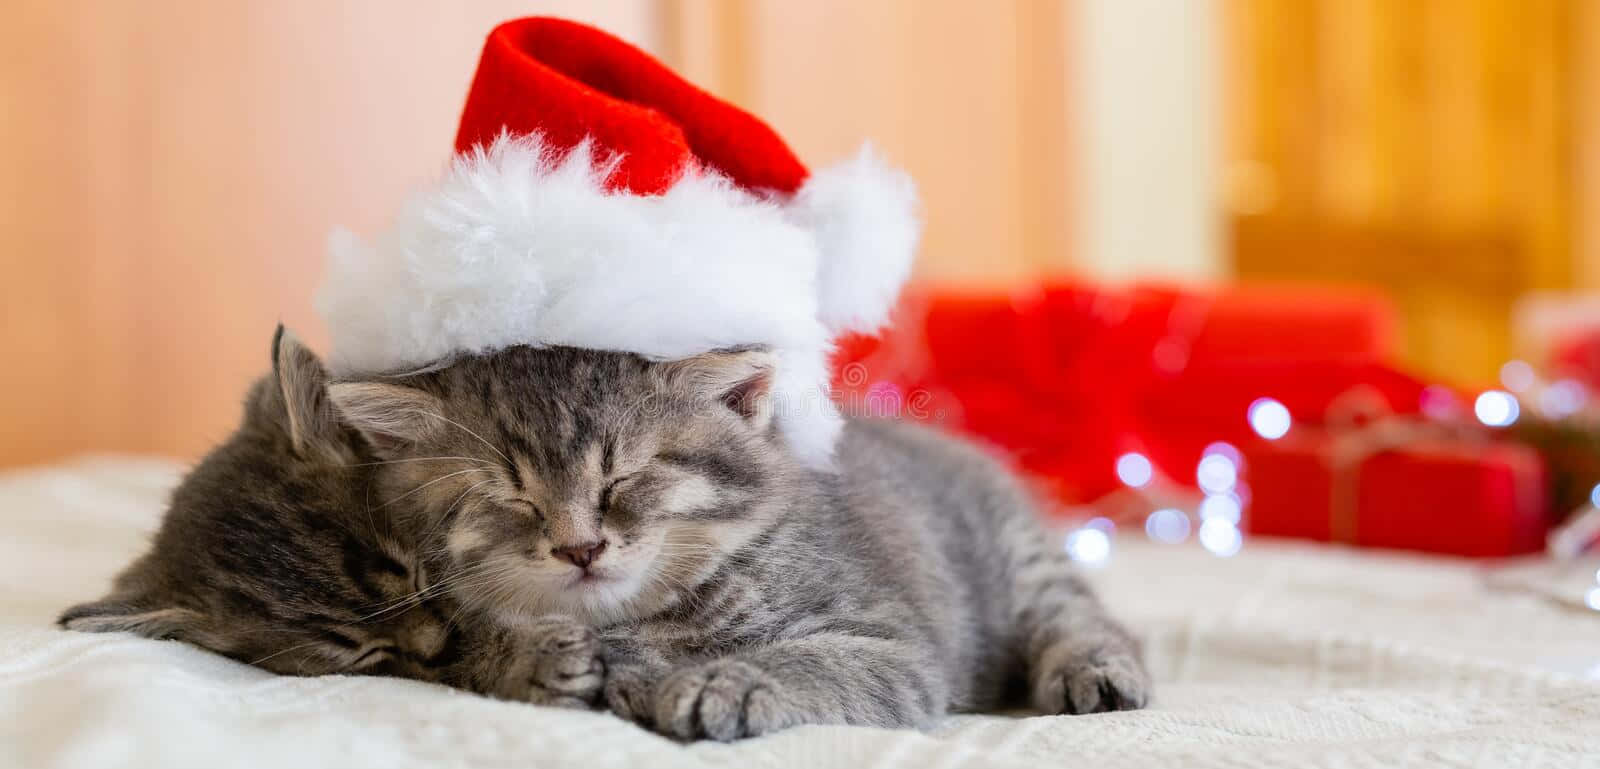 Download Cute Christmas Pictures | Wallpapers.com